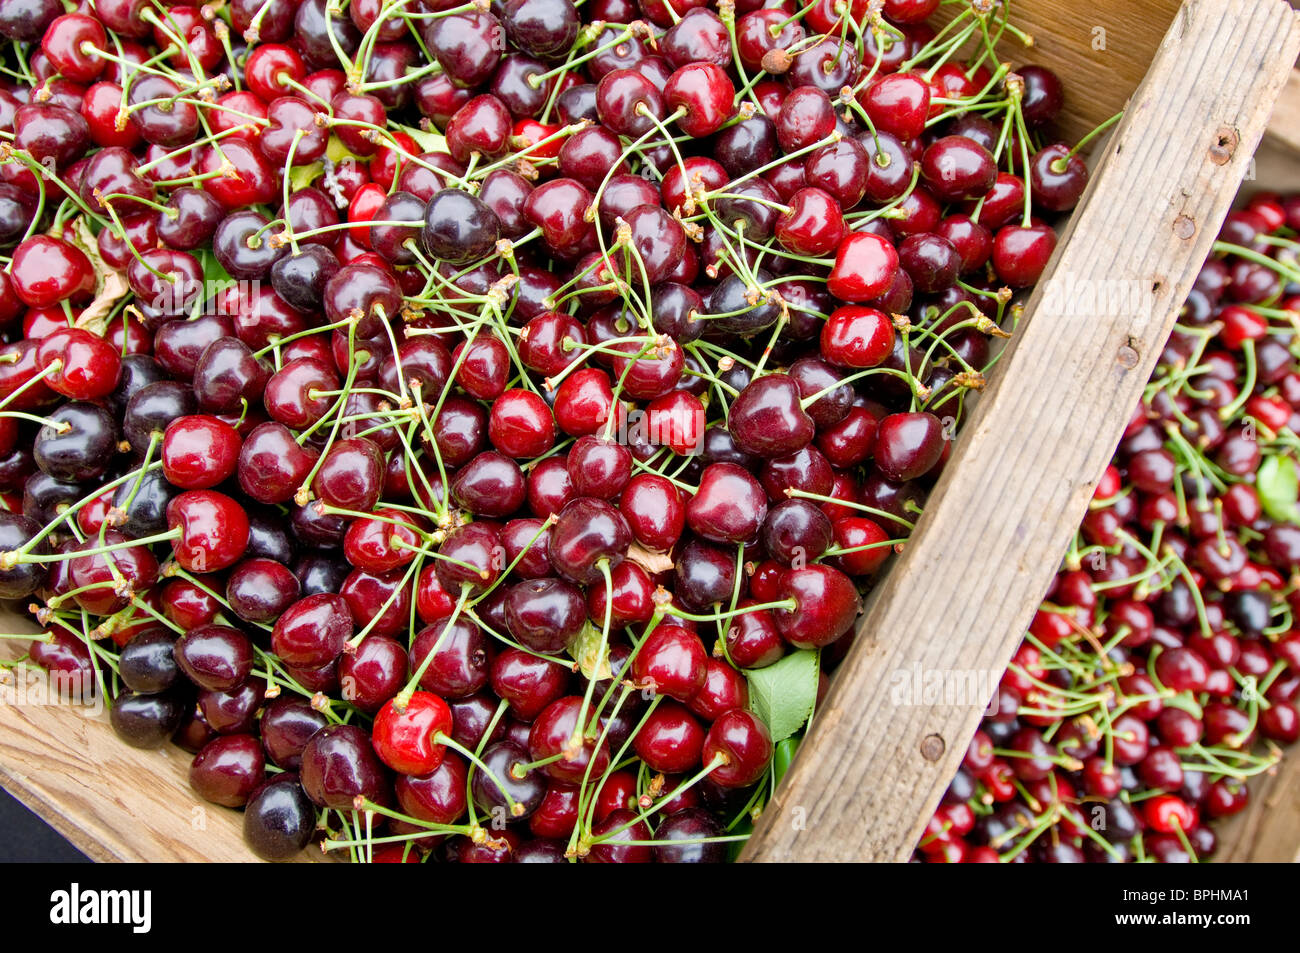 Fresh, freshly picked organic cherries in wooden boxes on sale at a morning market in Healdsberg, Sonoma Stock Photo